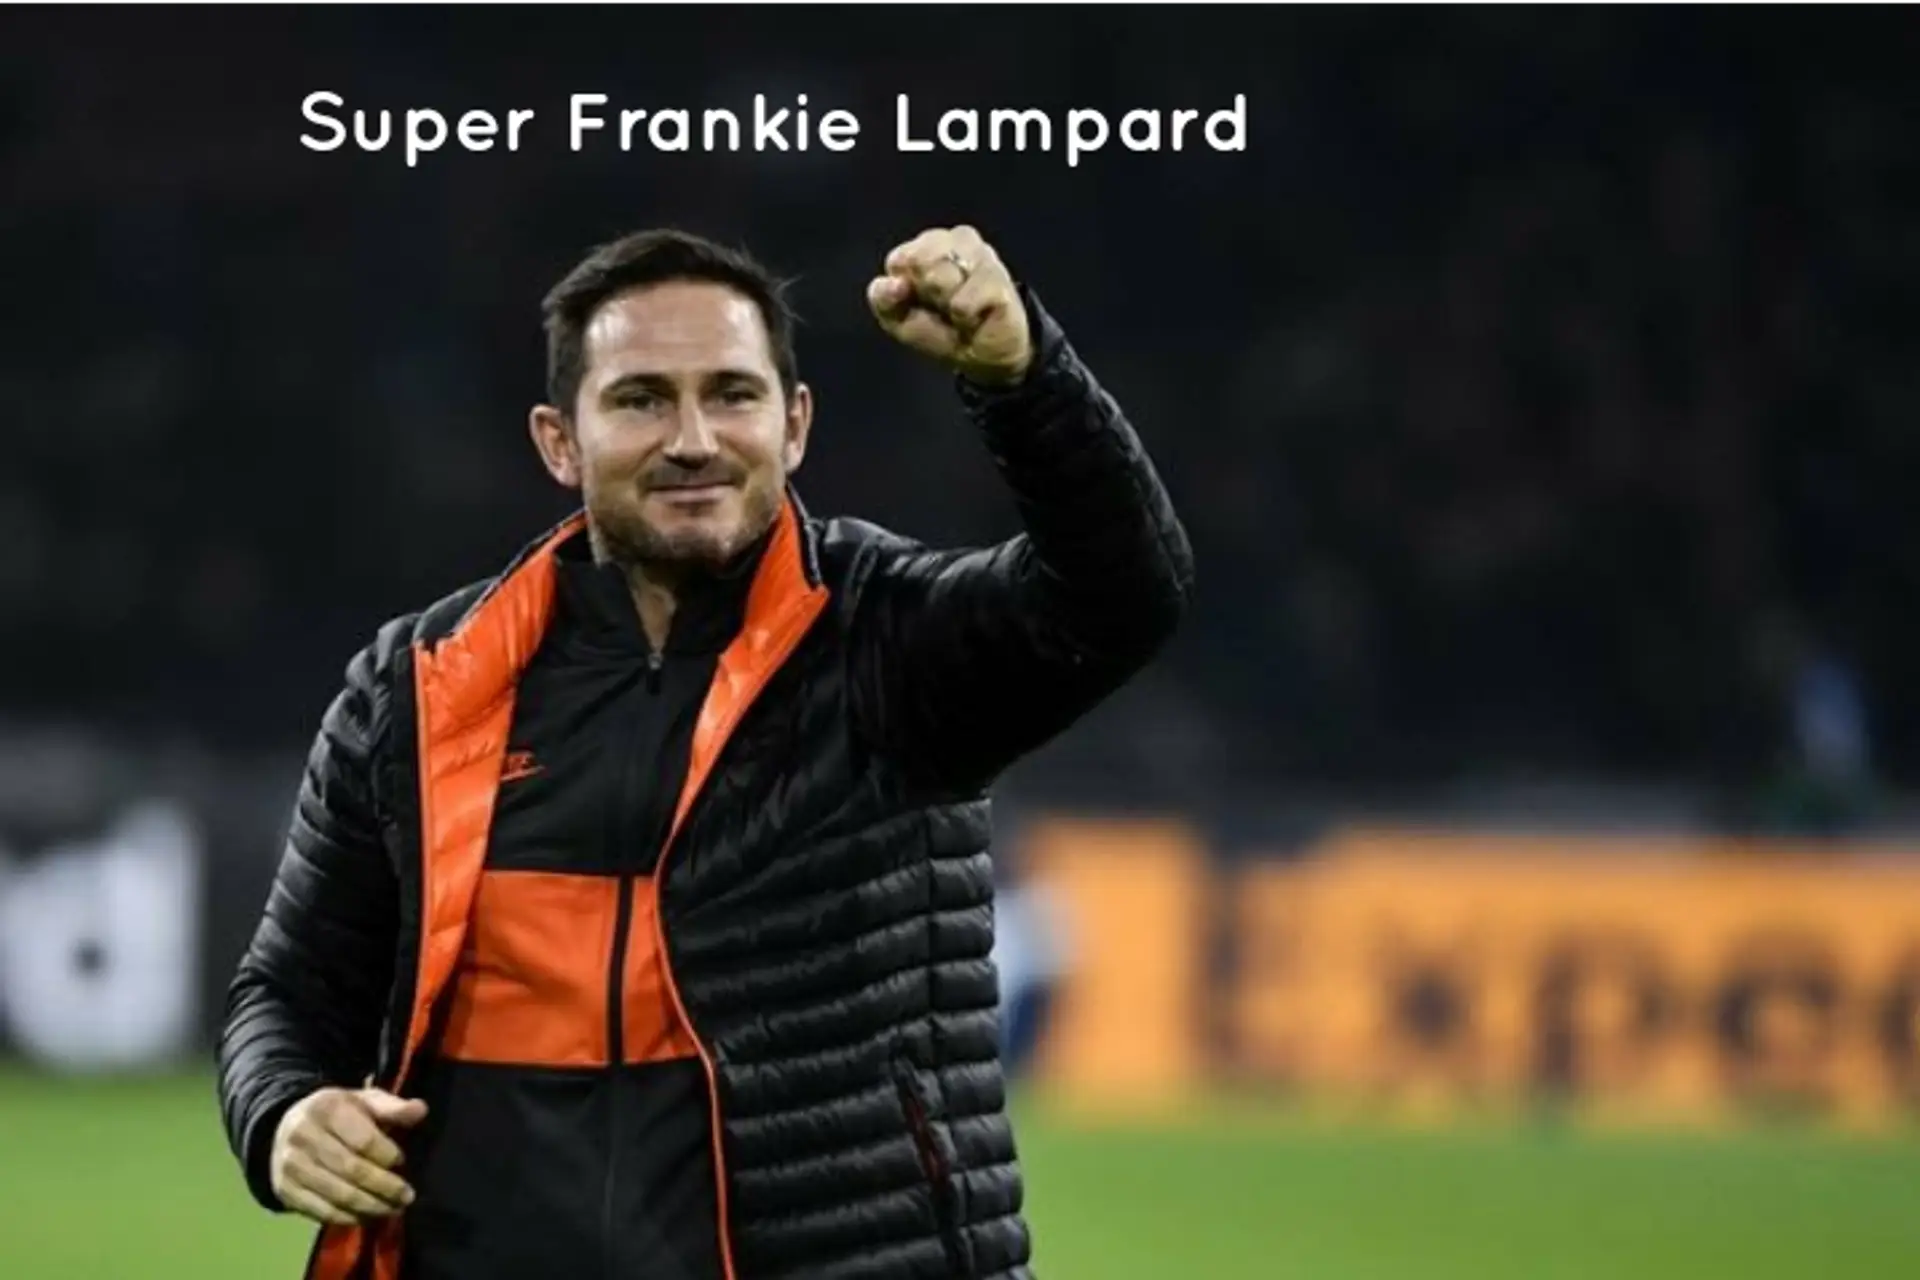 Why I Think Lampard Should be Pragmatic with the Remaining 6 Matches